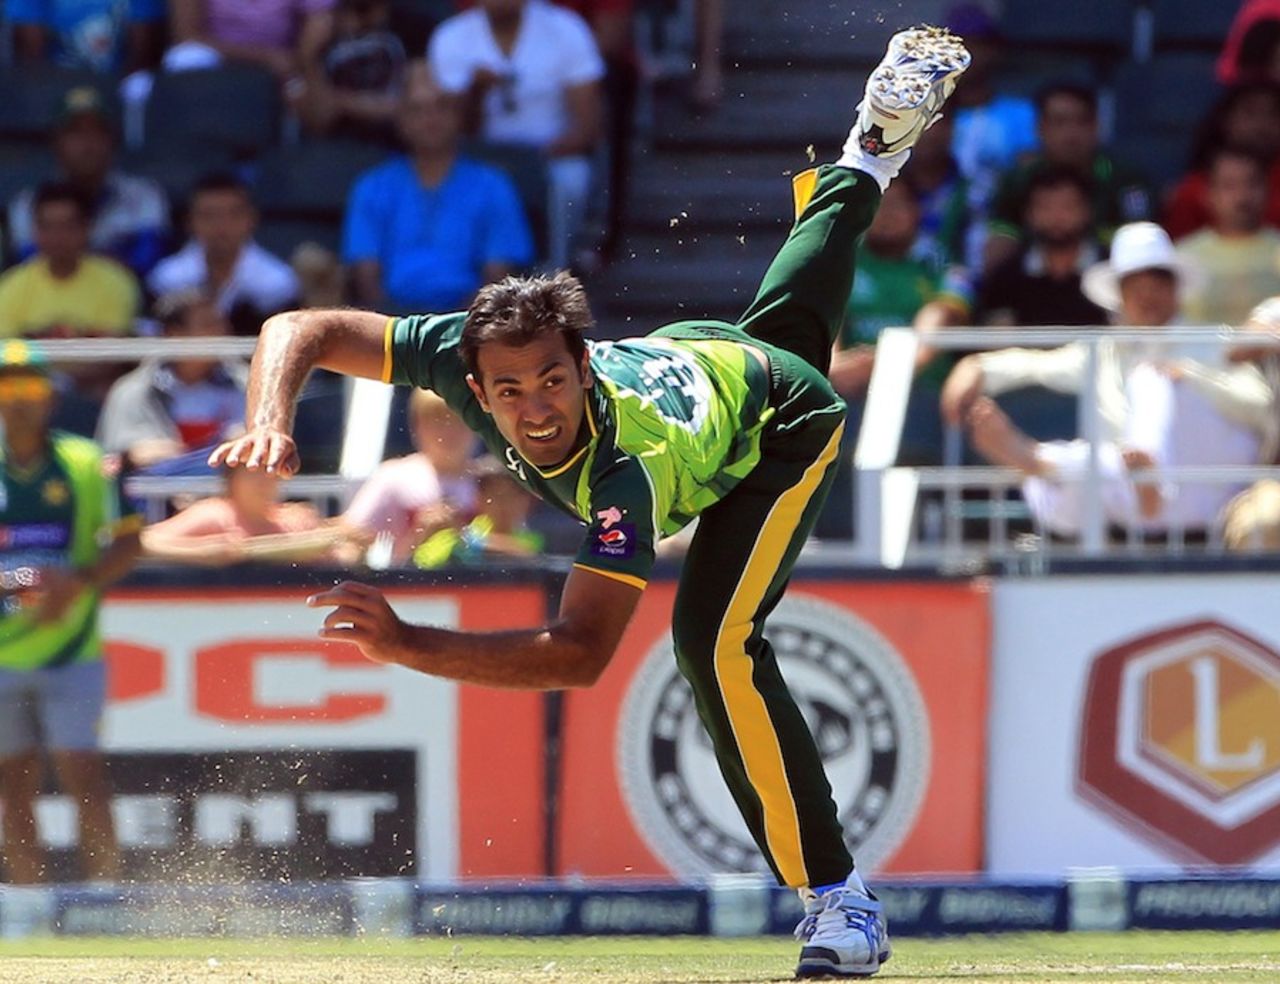 Wahab Riaz conceded 93 in ten overs, the most for a Pakistan bowler in an ODI, South Africa v Pakistan, 3rd ODI, Johannesburg, March 17, 2013